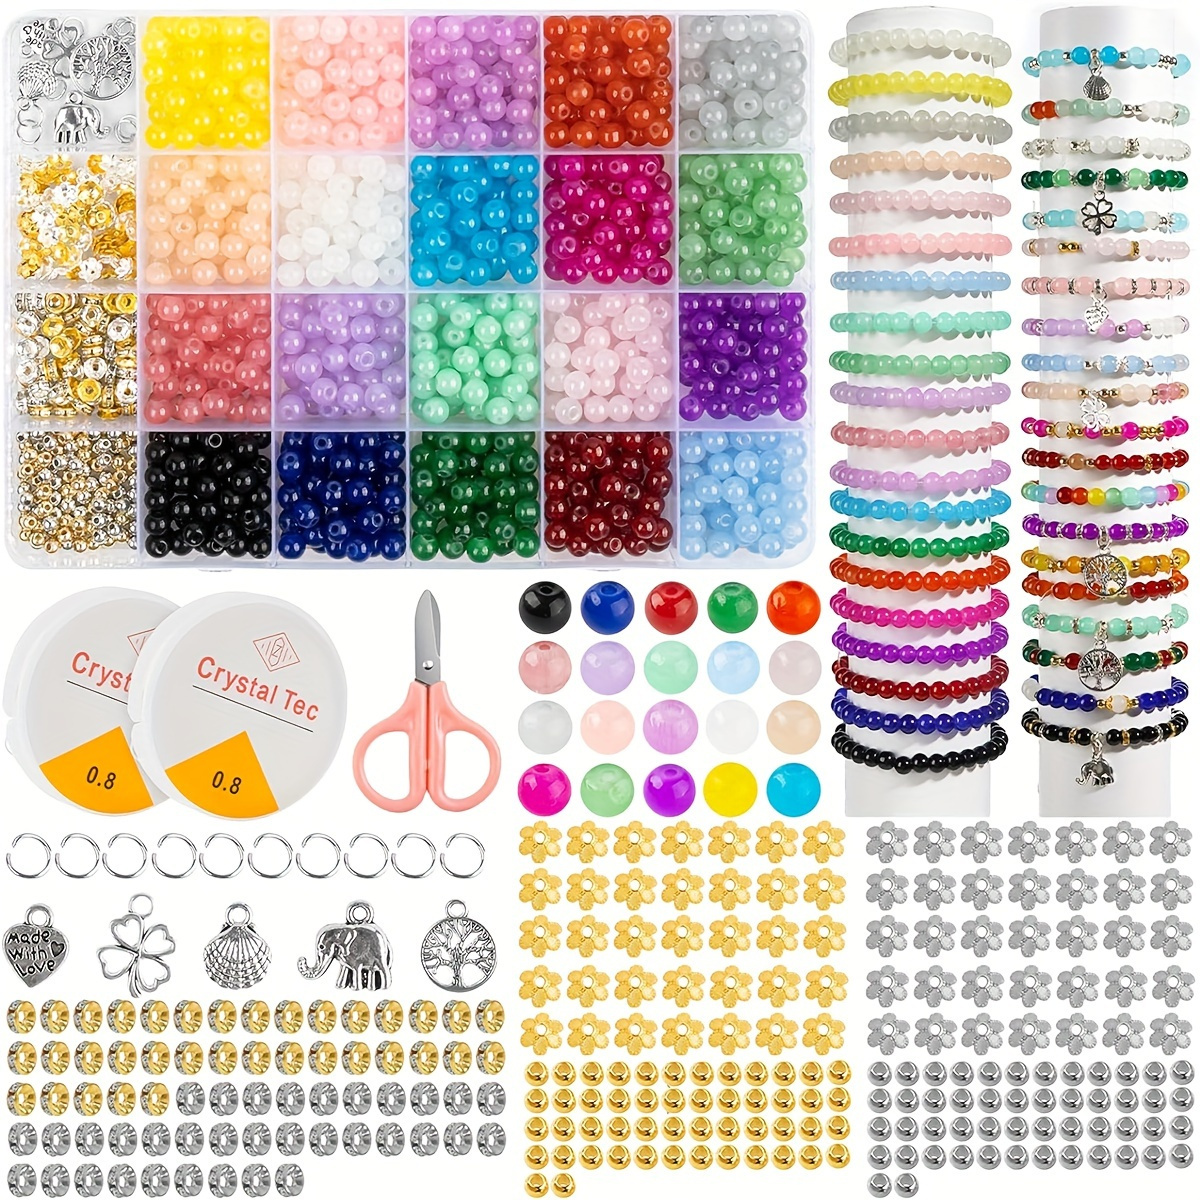 

1258 Pcs 6mm Glass Beads Bracelet Making Kit, 20 Colors Round Glass Loose Beads, Elastic Cord, Charms, Opening Rings, Bohemian Style, For Making Bracelet And Necklace